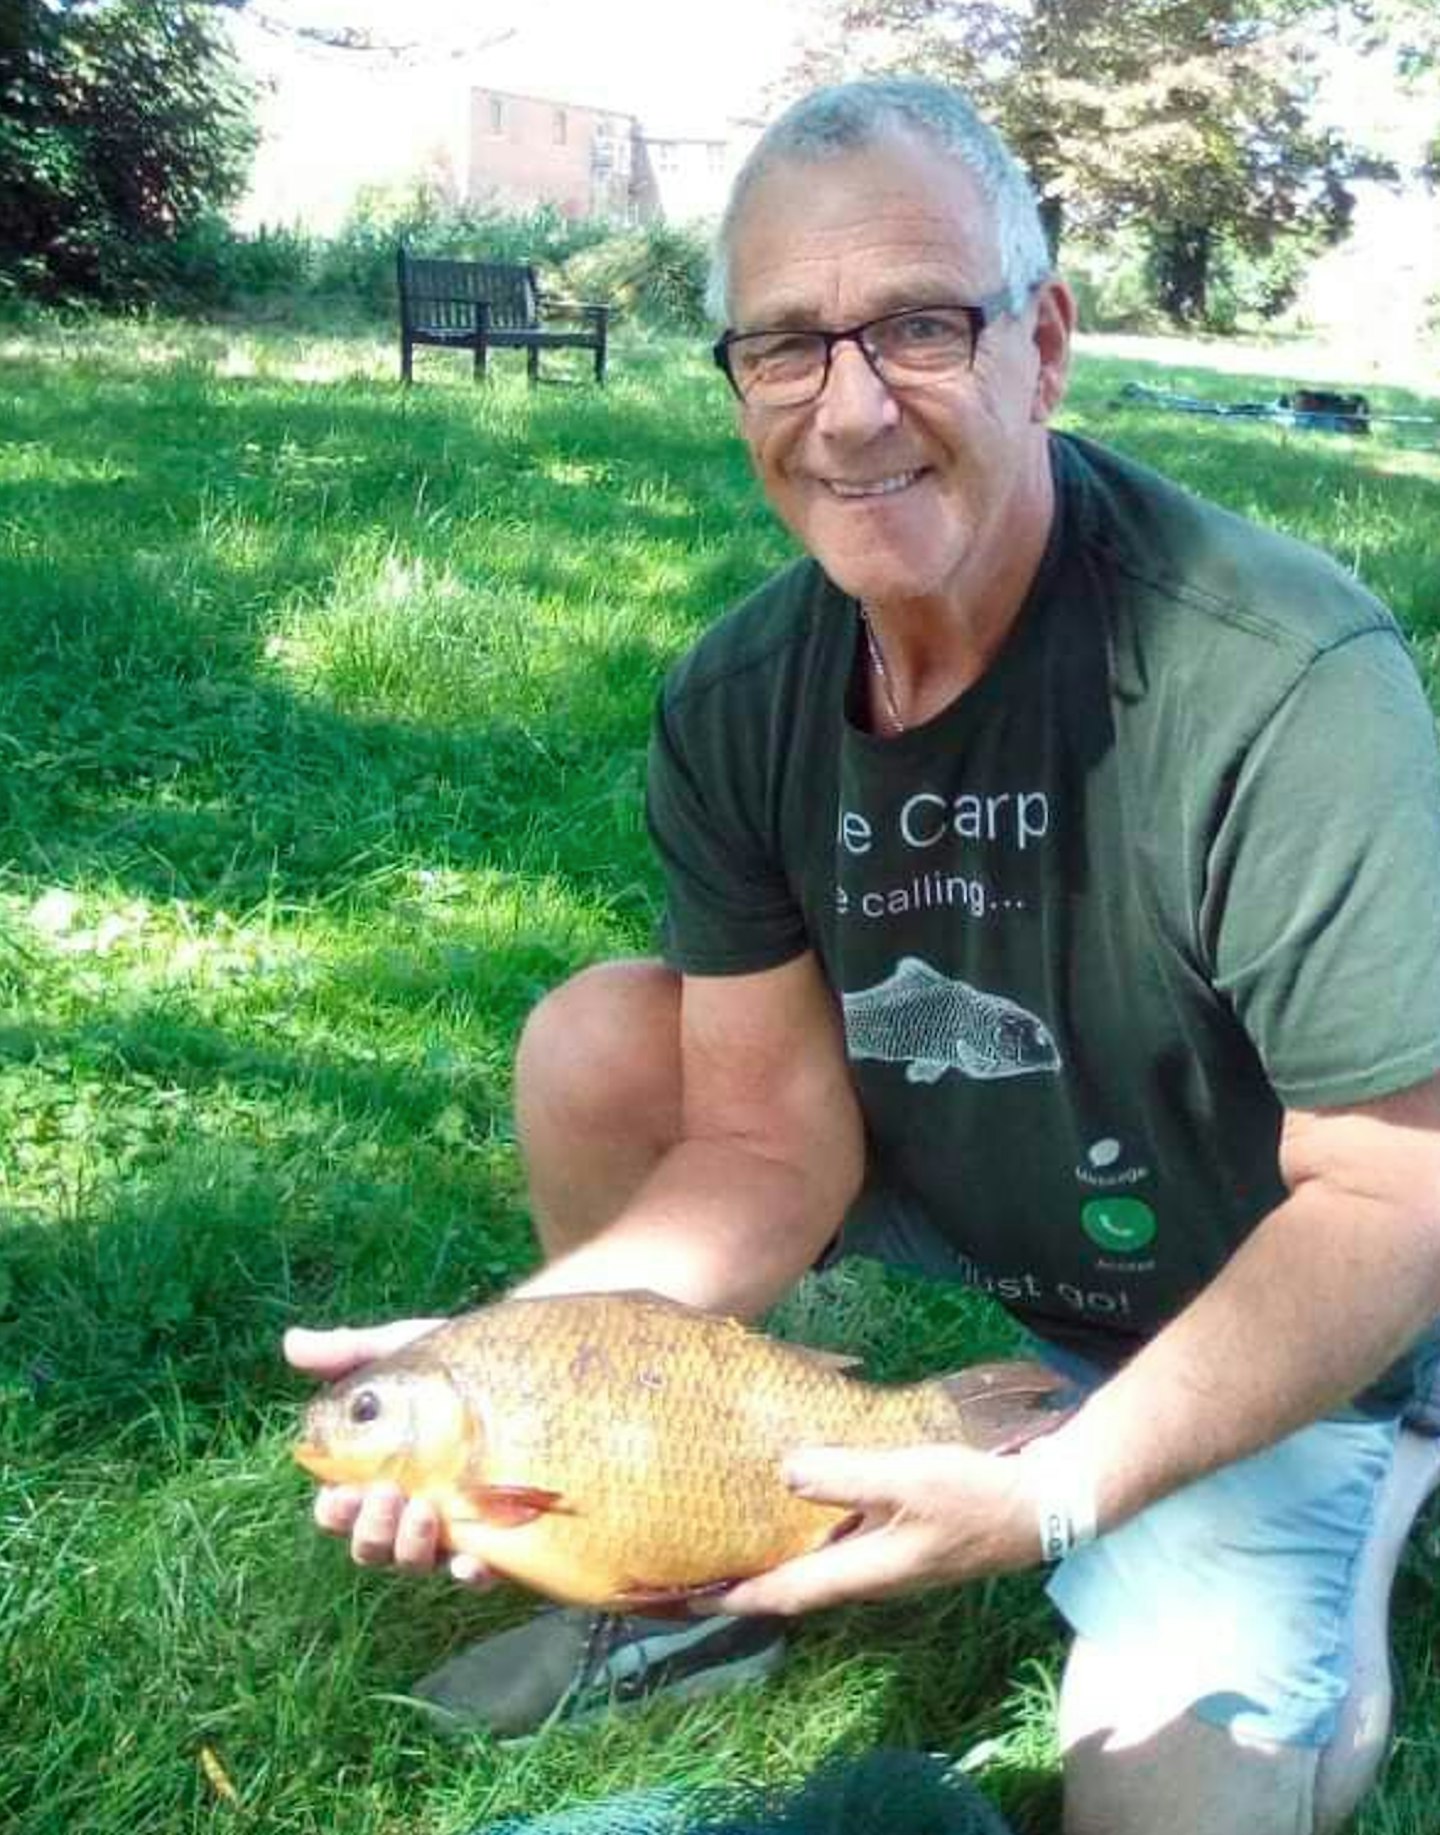 Mick Phillips landed the monster crucian on a whole dendrobaena